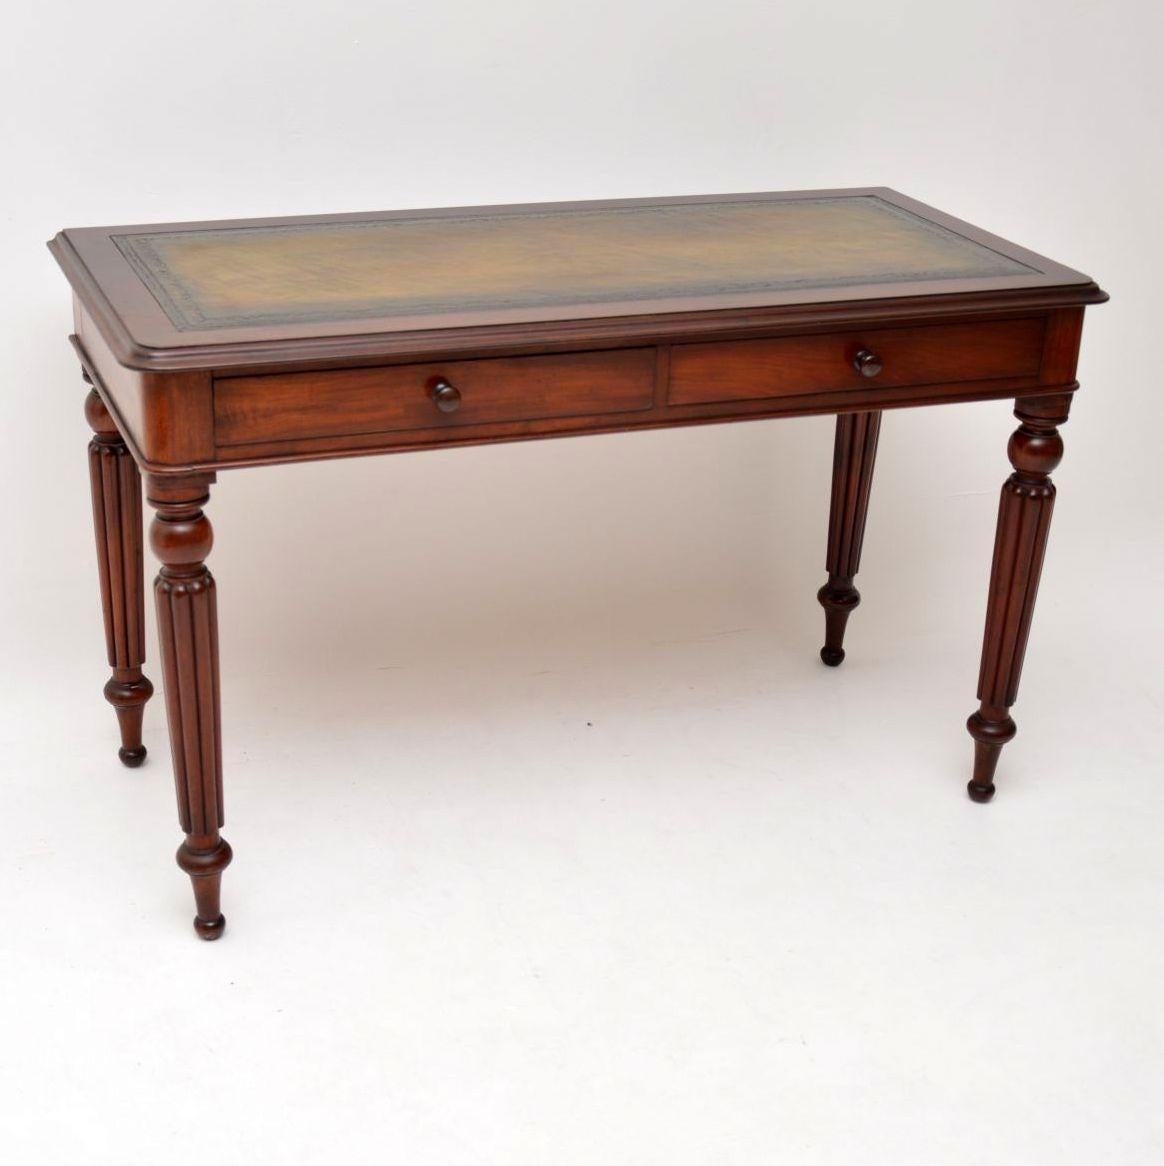 This antique Victorian mahogany writing table is of high quality & is quite large with a decent size working area. The leather writing surface has lots of character & is hand tooled. The are two drawers below, with turned bun handles & Fine